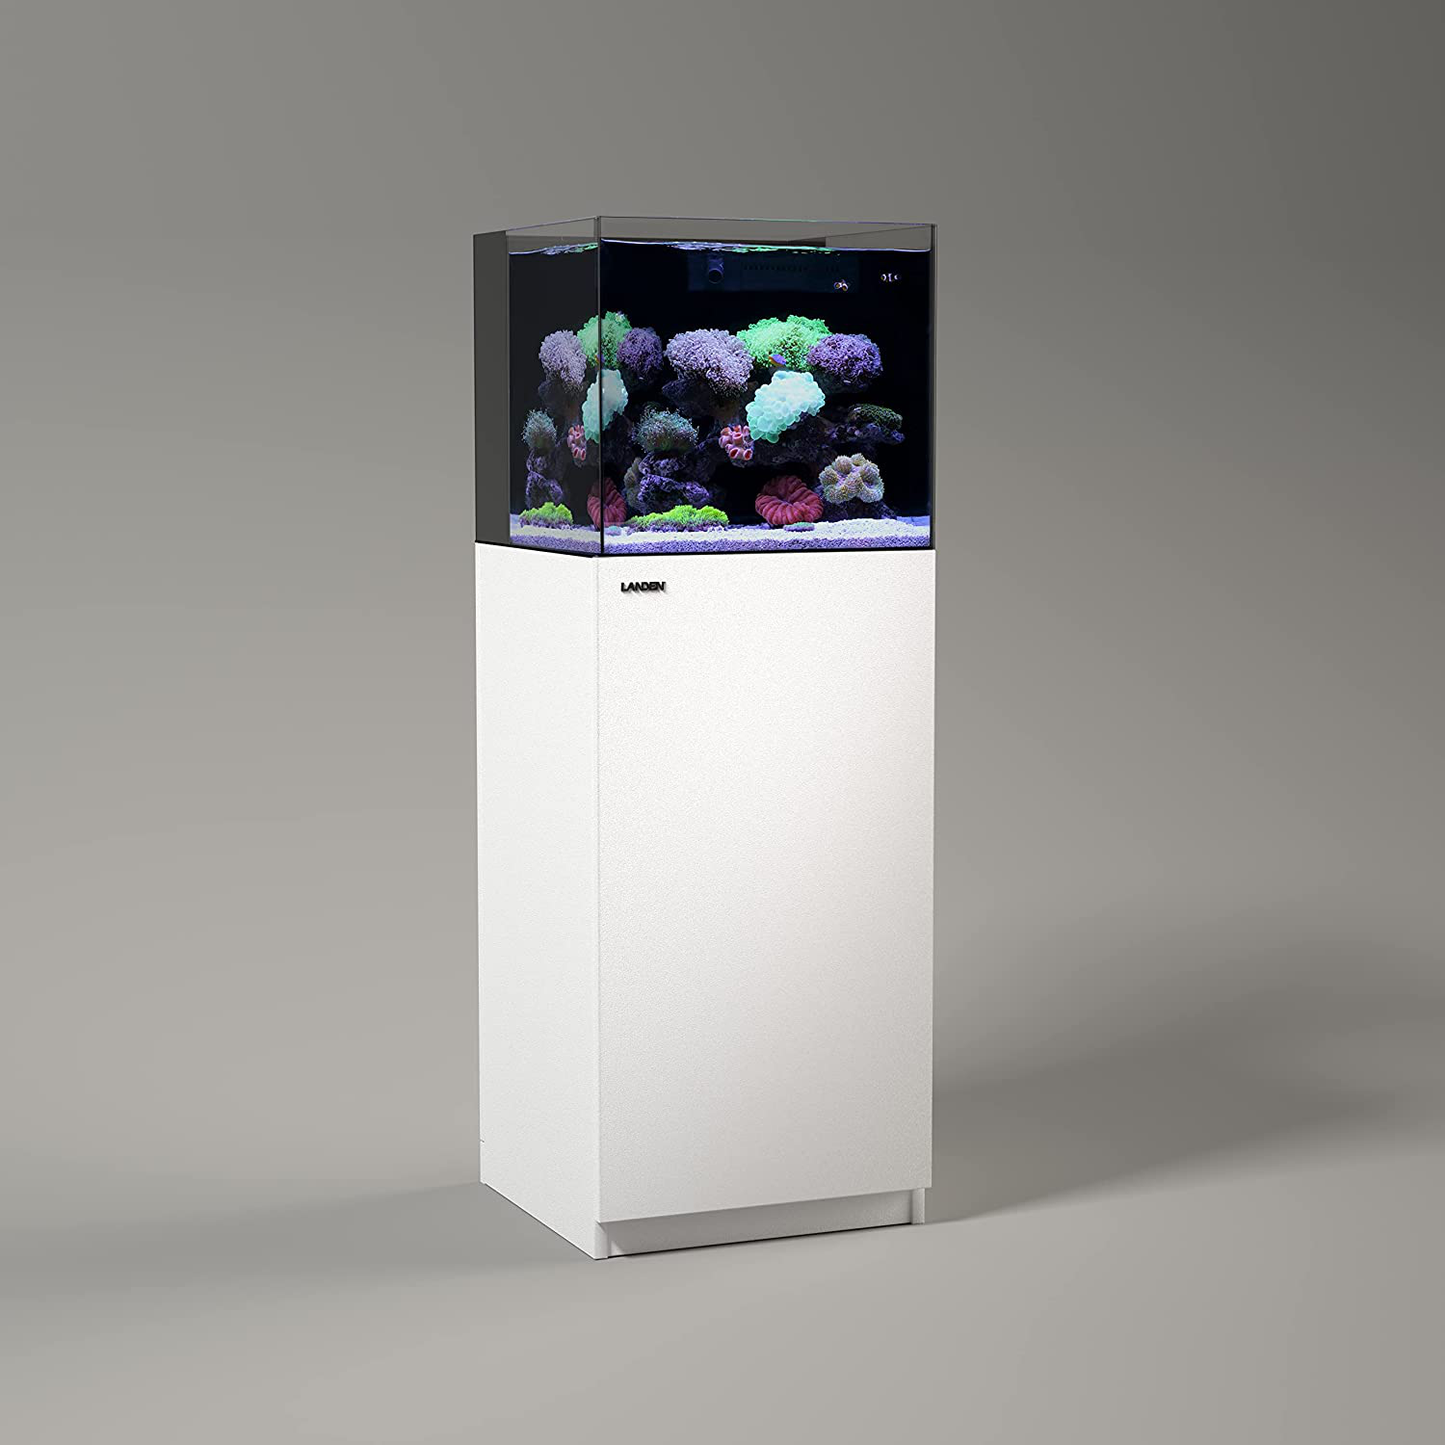 LANDEN Aquarium Stand and Cabinet, Random Color for Clearance for Fish Tank, Nano Foam Leveling Mat Included, Contemporary and Simple Design, Wooden Gloss White or Black Painted(Stand Only)